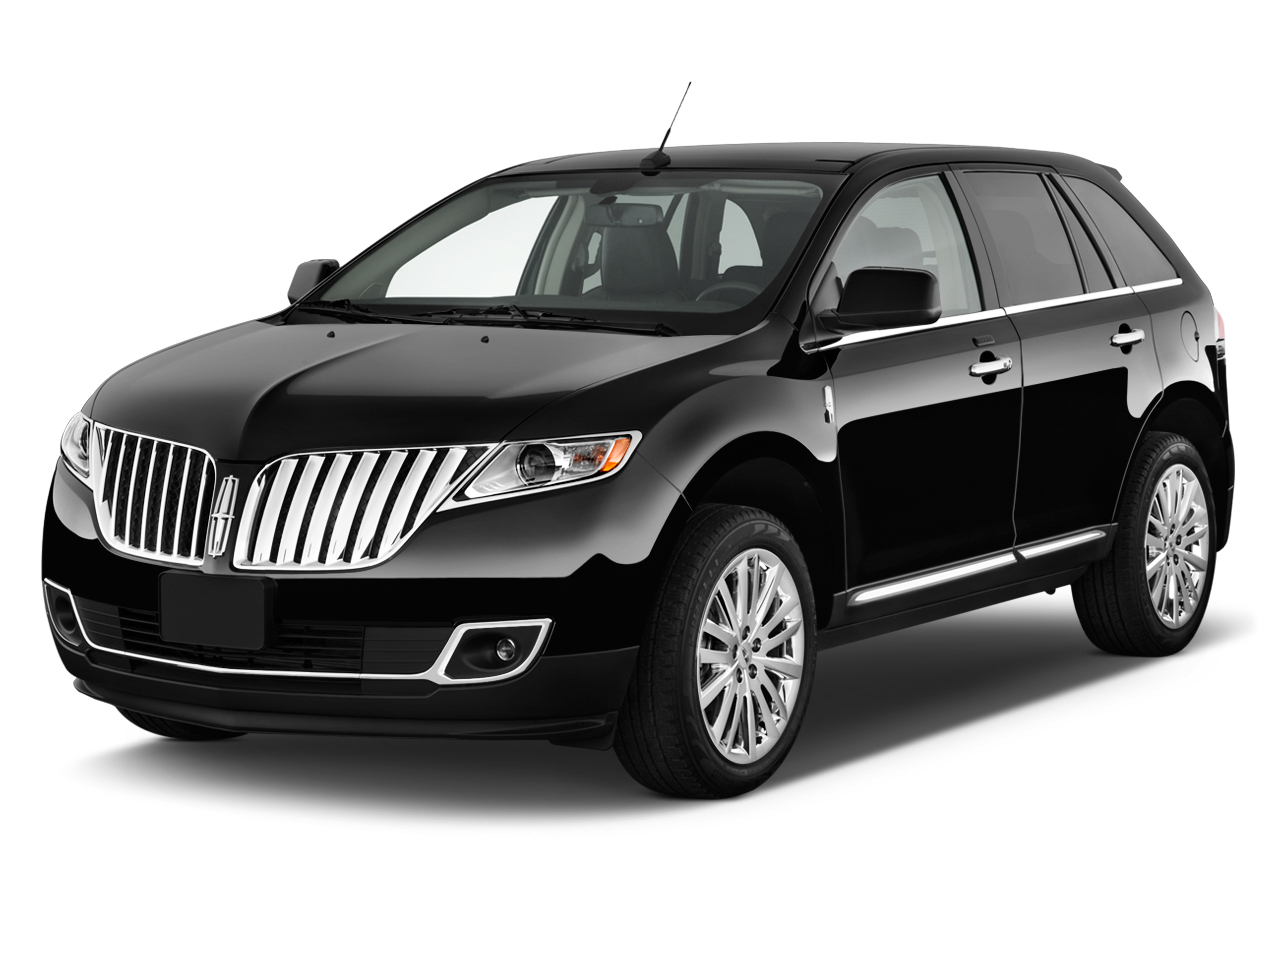 2011 lincoln mkx specs